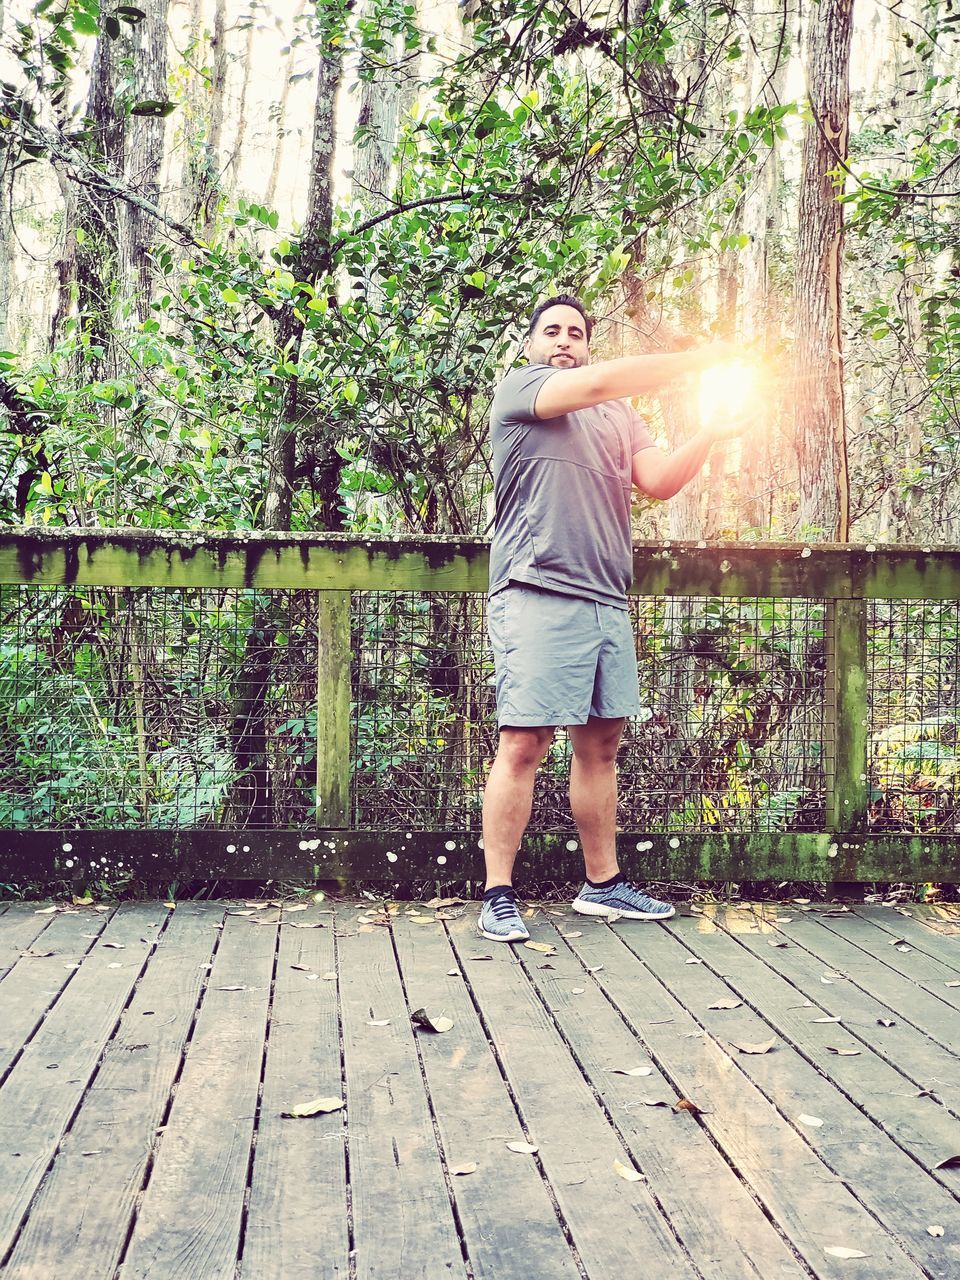 one person, full length, sunlight, casual clothing, nature, leisure activity, lifestyles, plant, standing, day, tree, lens flare, young adult, wood, adult, outdoors, outdoor structure, sunbeam, front view, women, men, backyard, walkway, architecture, footpath, growth, boardwalk, person, built structure, clothing